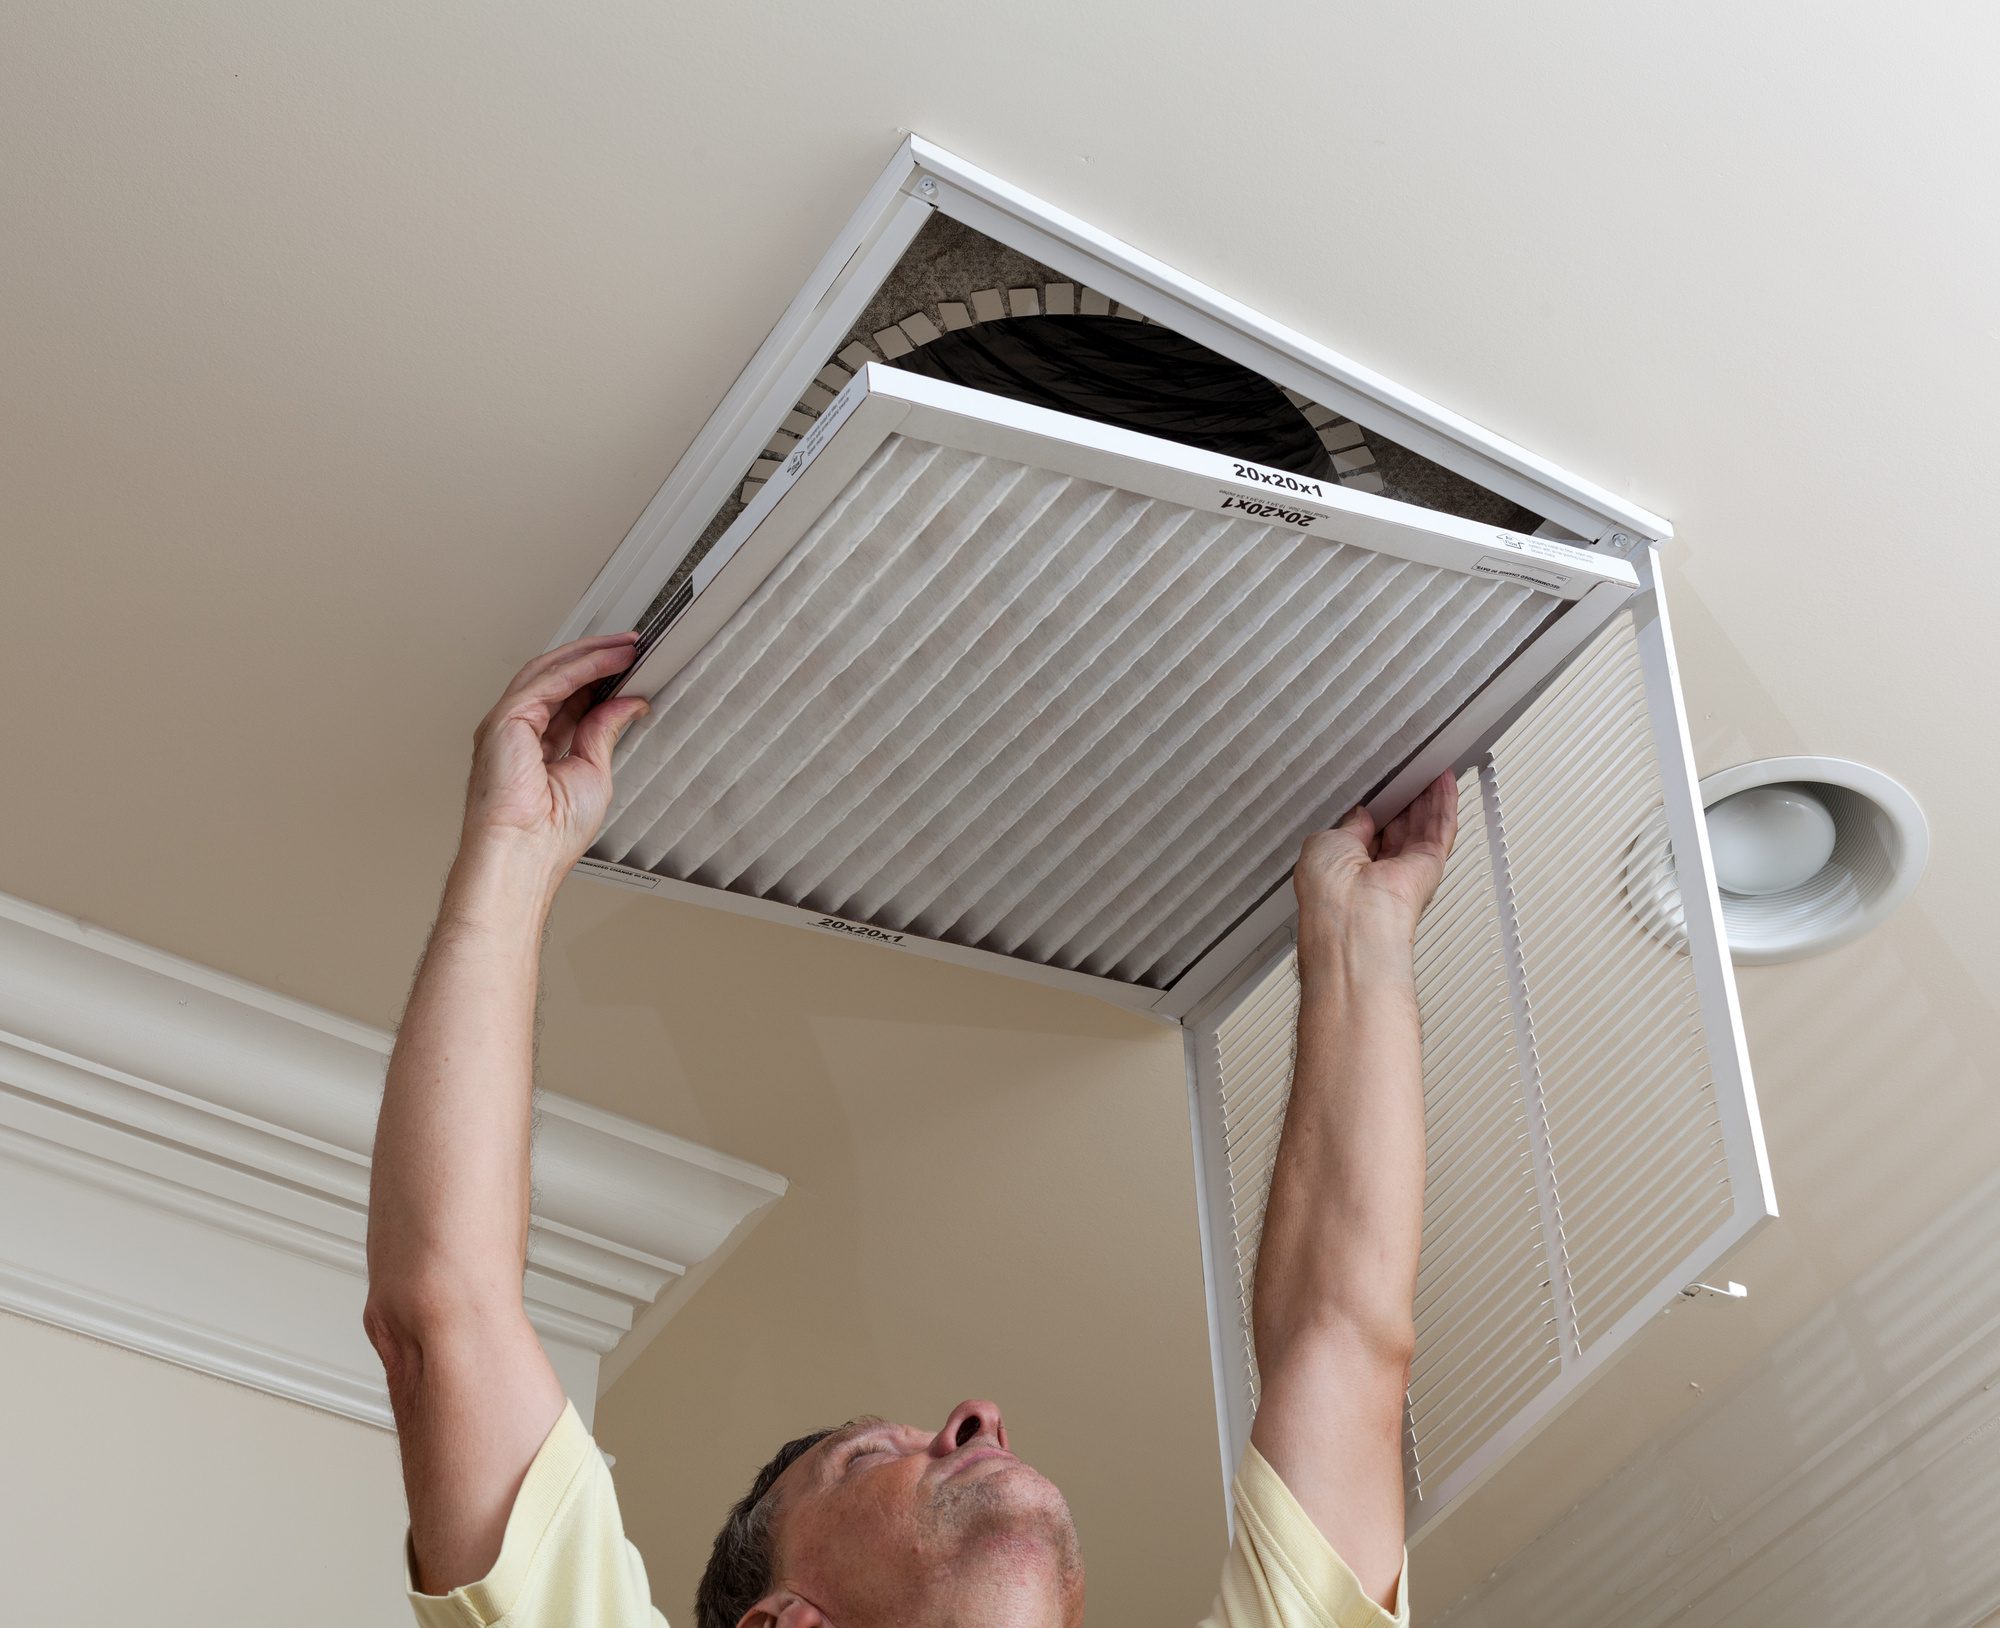 How Often Should You Change an AC Filter?